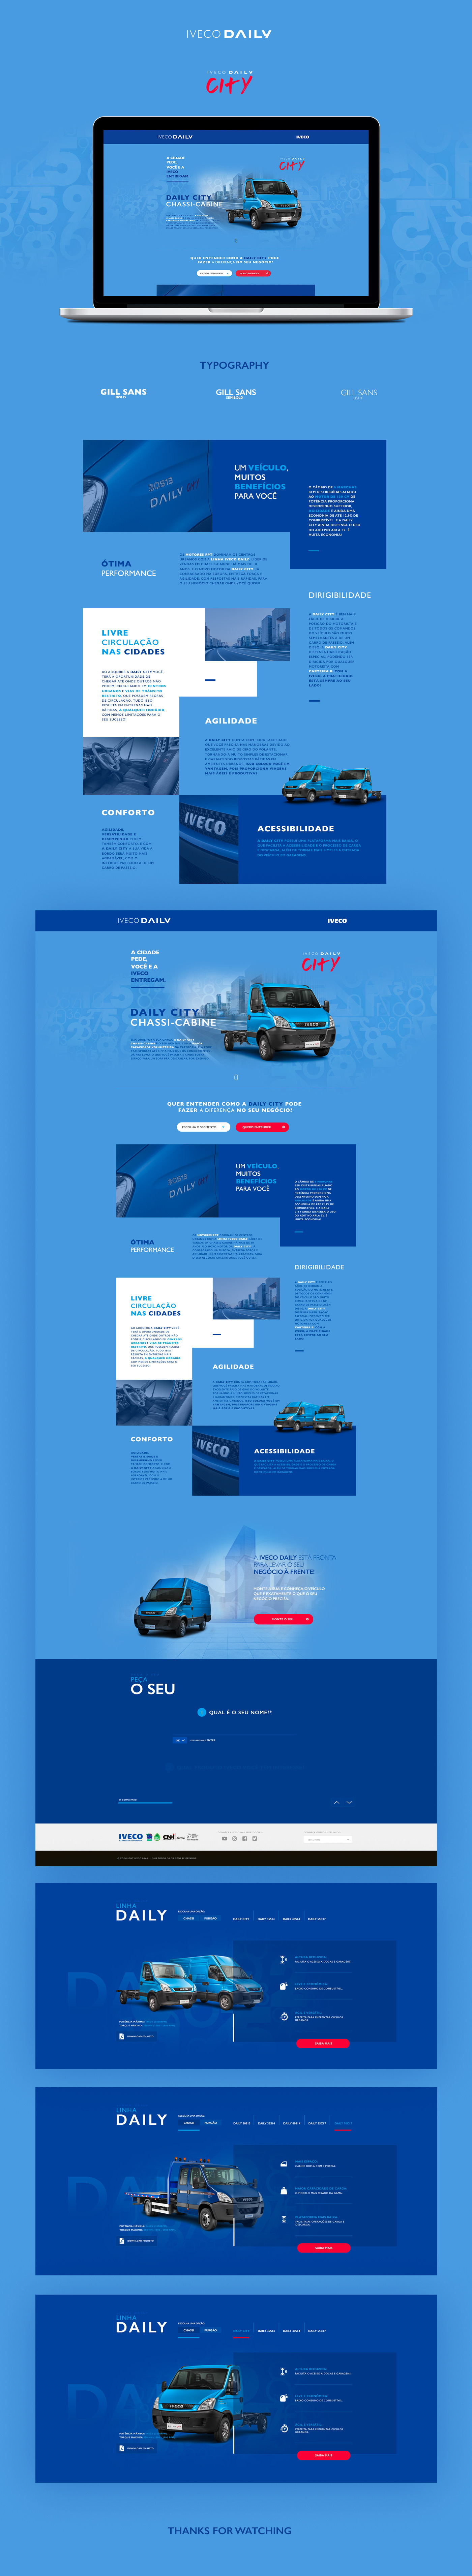 daily daily city IVECO landing page